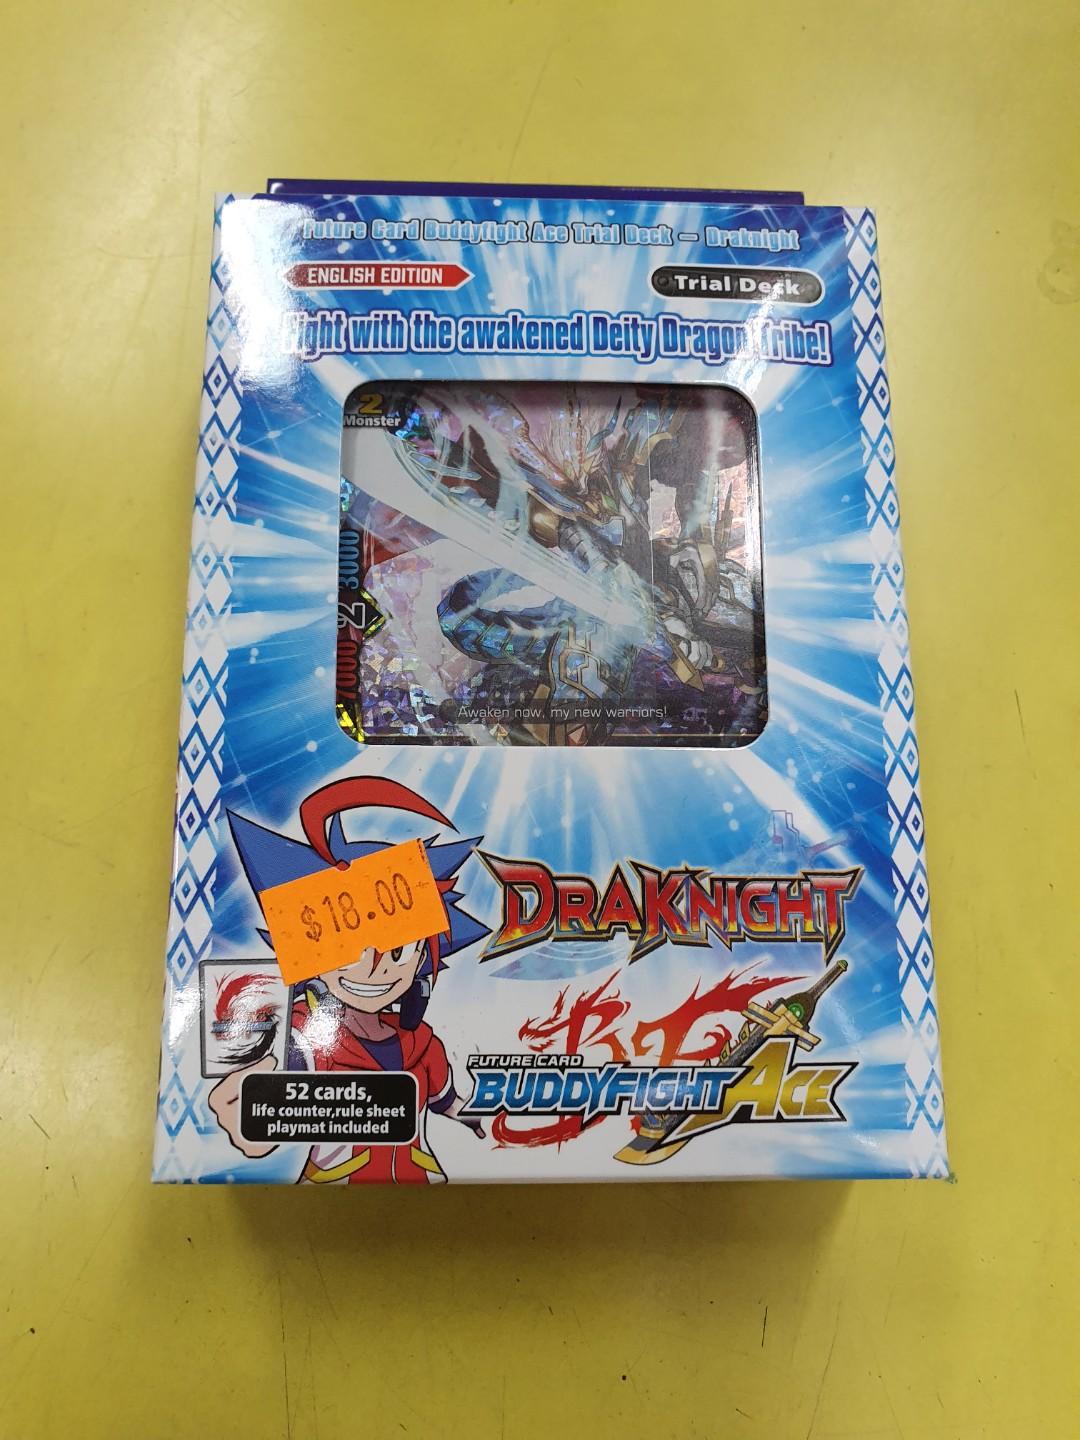 Buddyfight Deck Holder Collection V2 Extra Vol.18 "the Chaos"